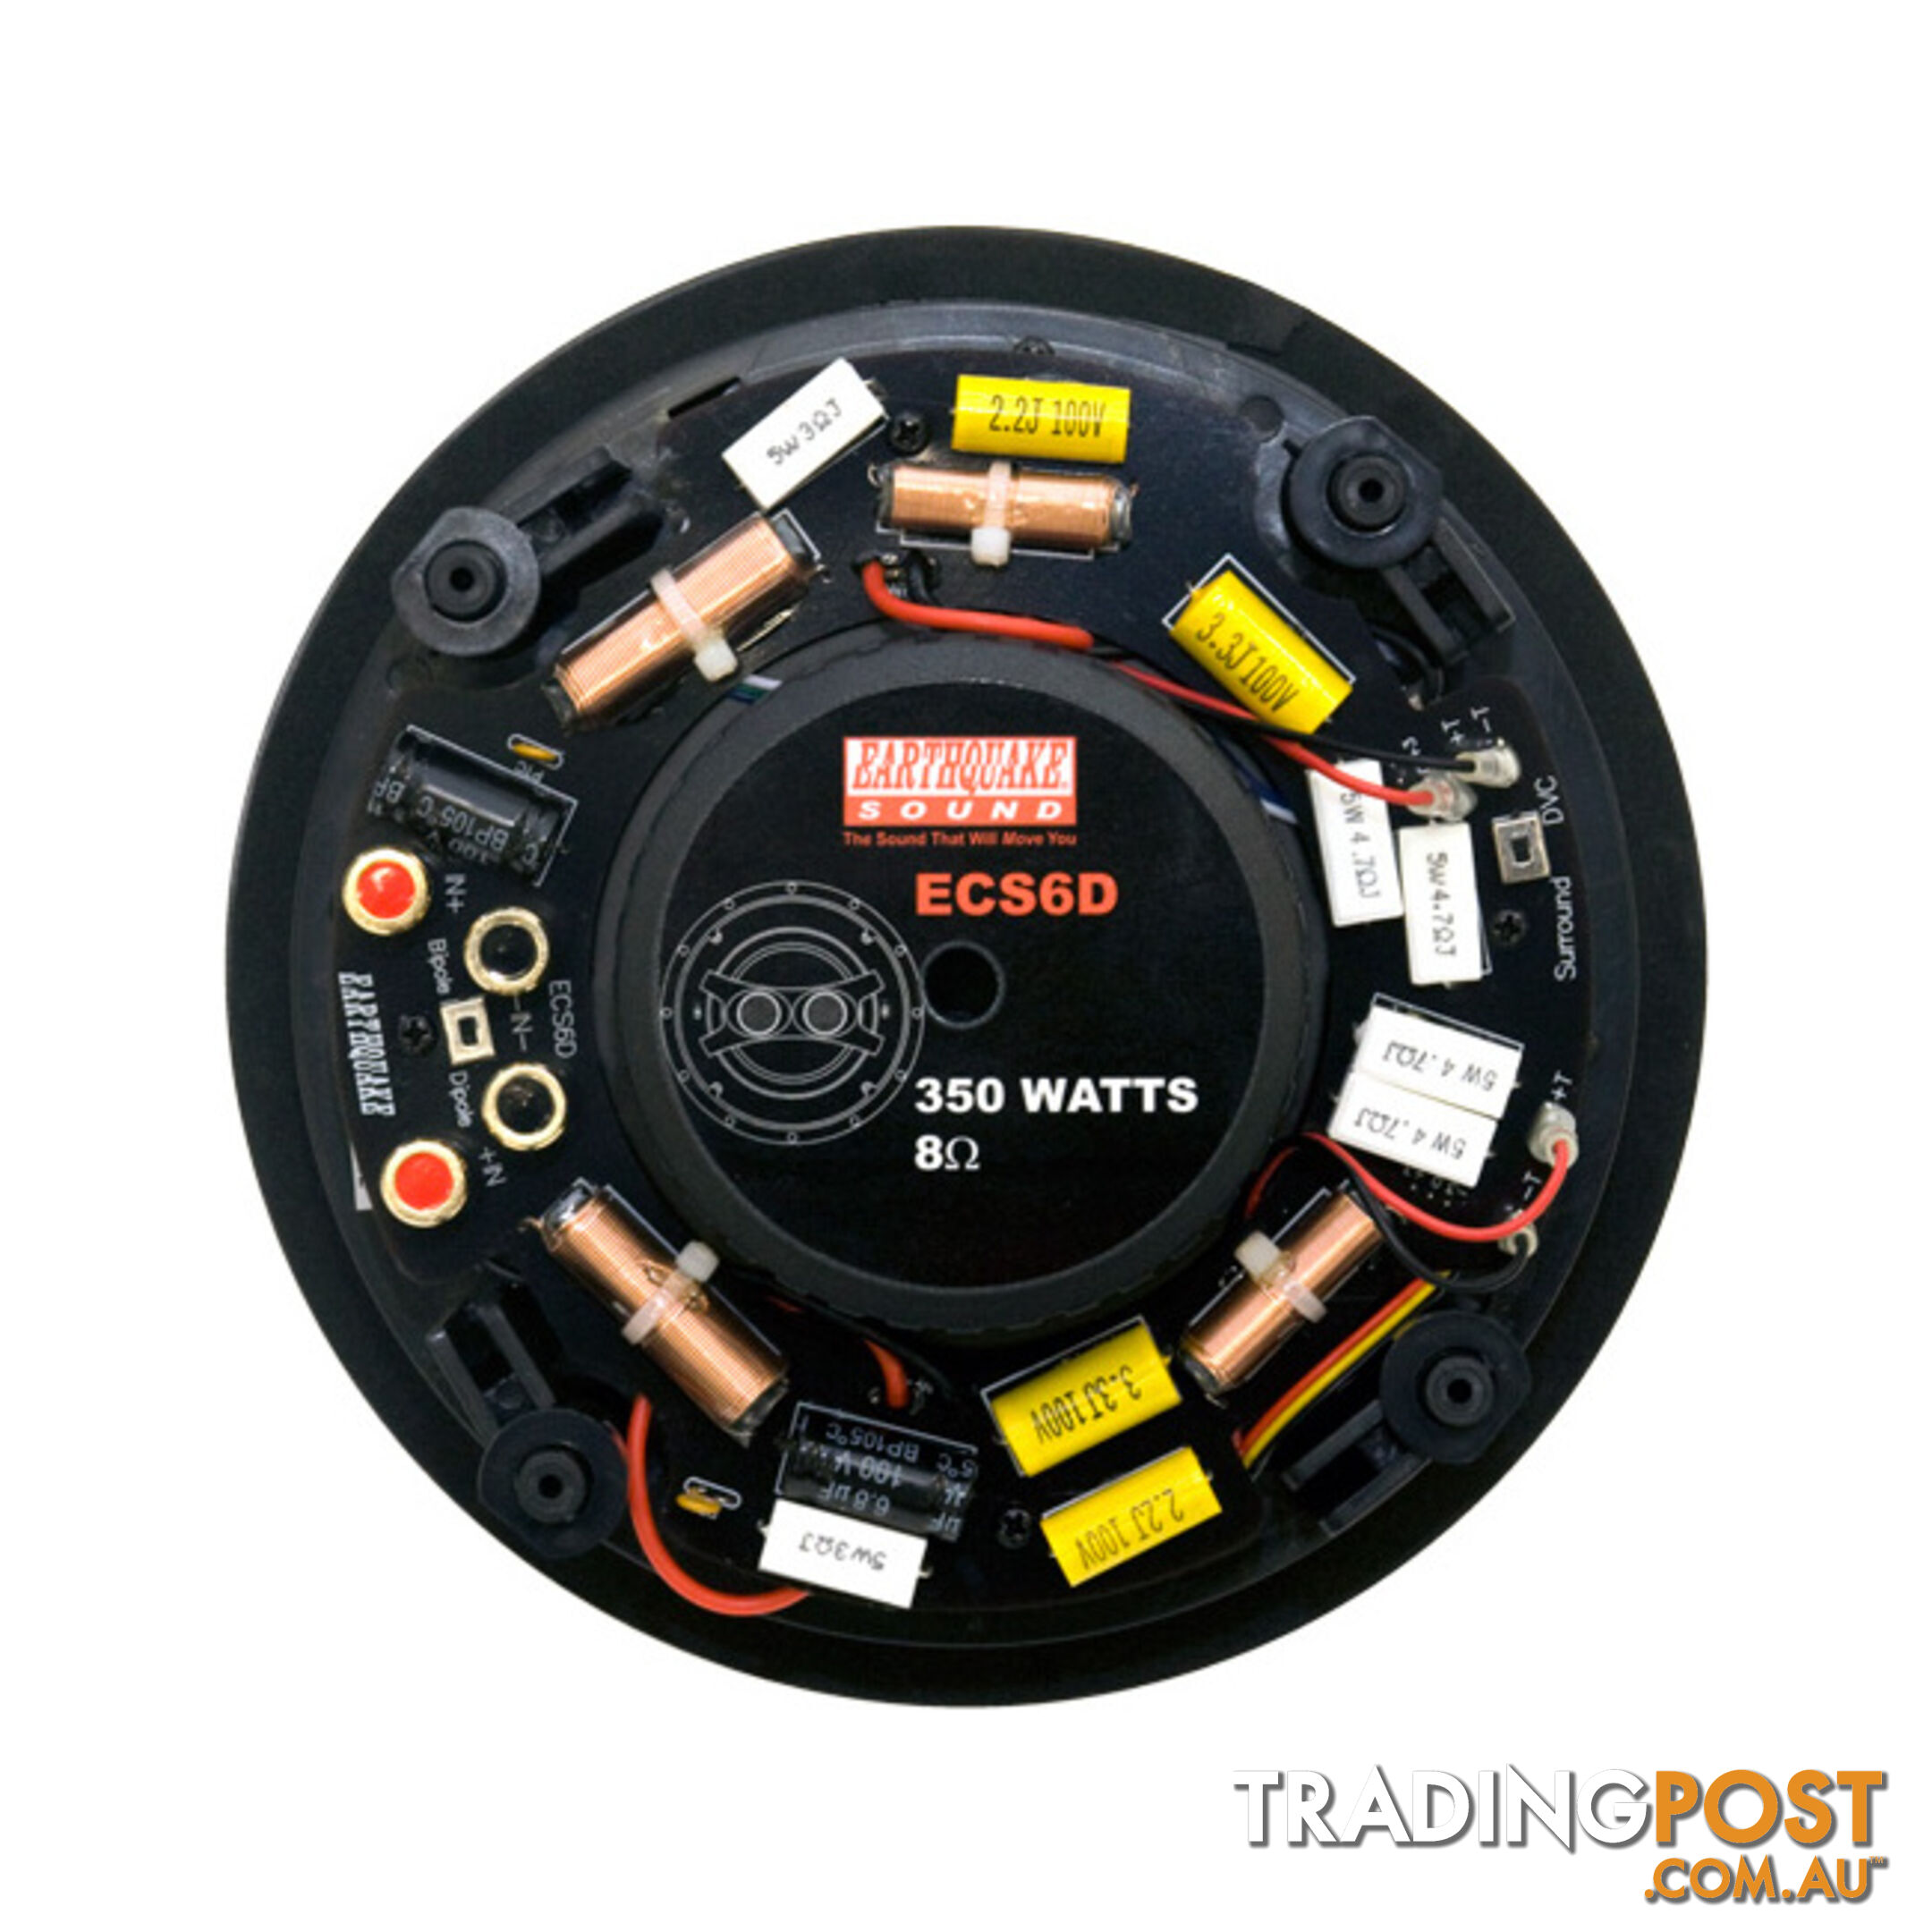 ECS6DUAL 6.5" CEILING STEREO SPEAKER DIPOLE/BIPOLE SOLD AS SINGLE